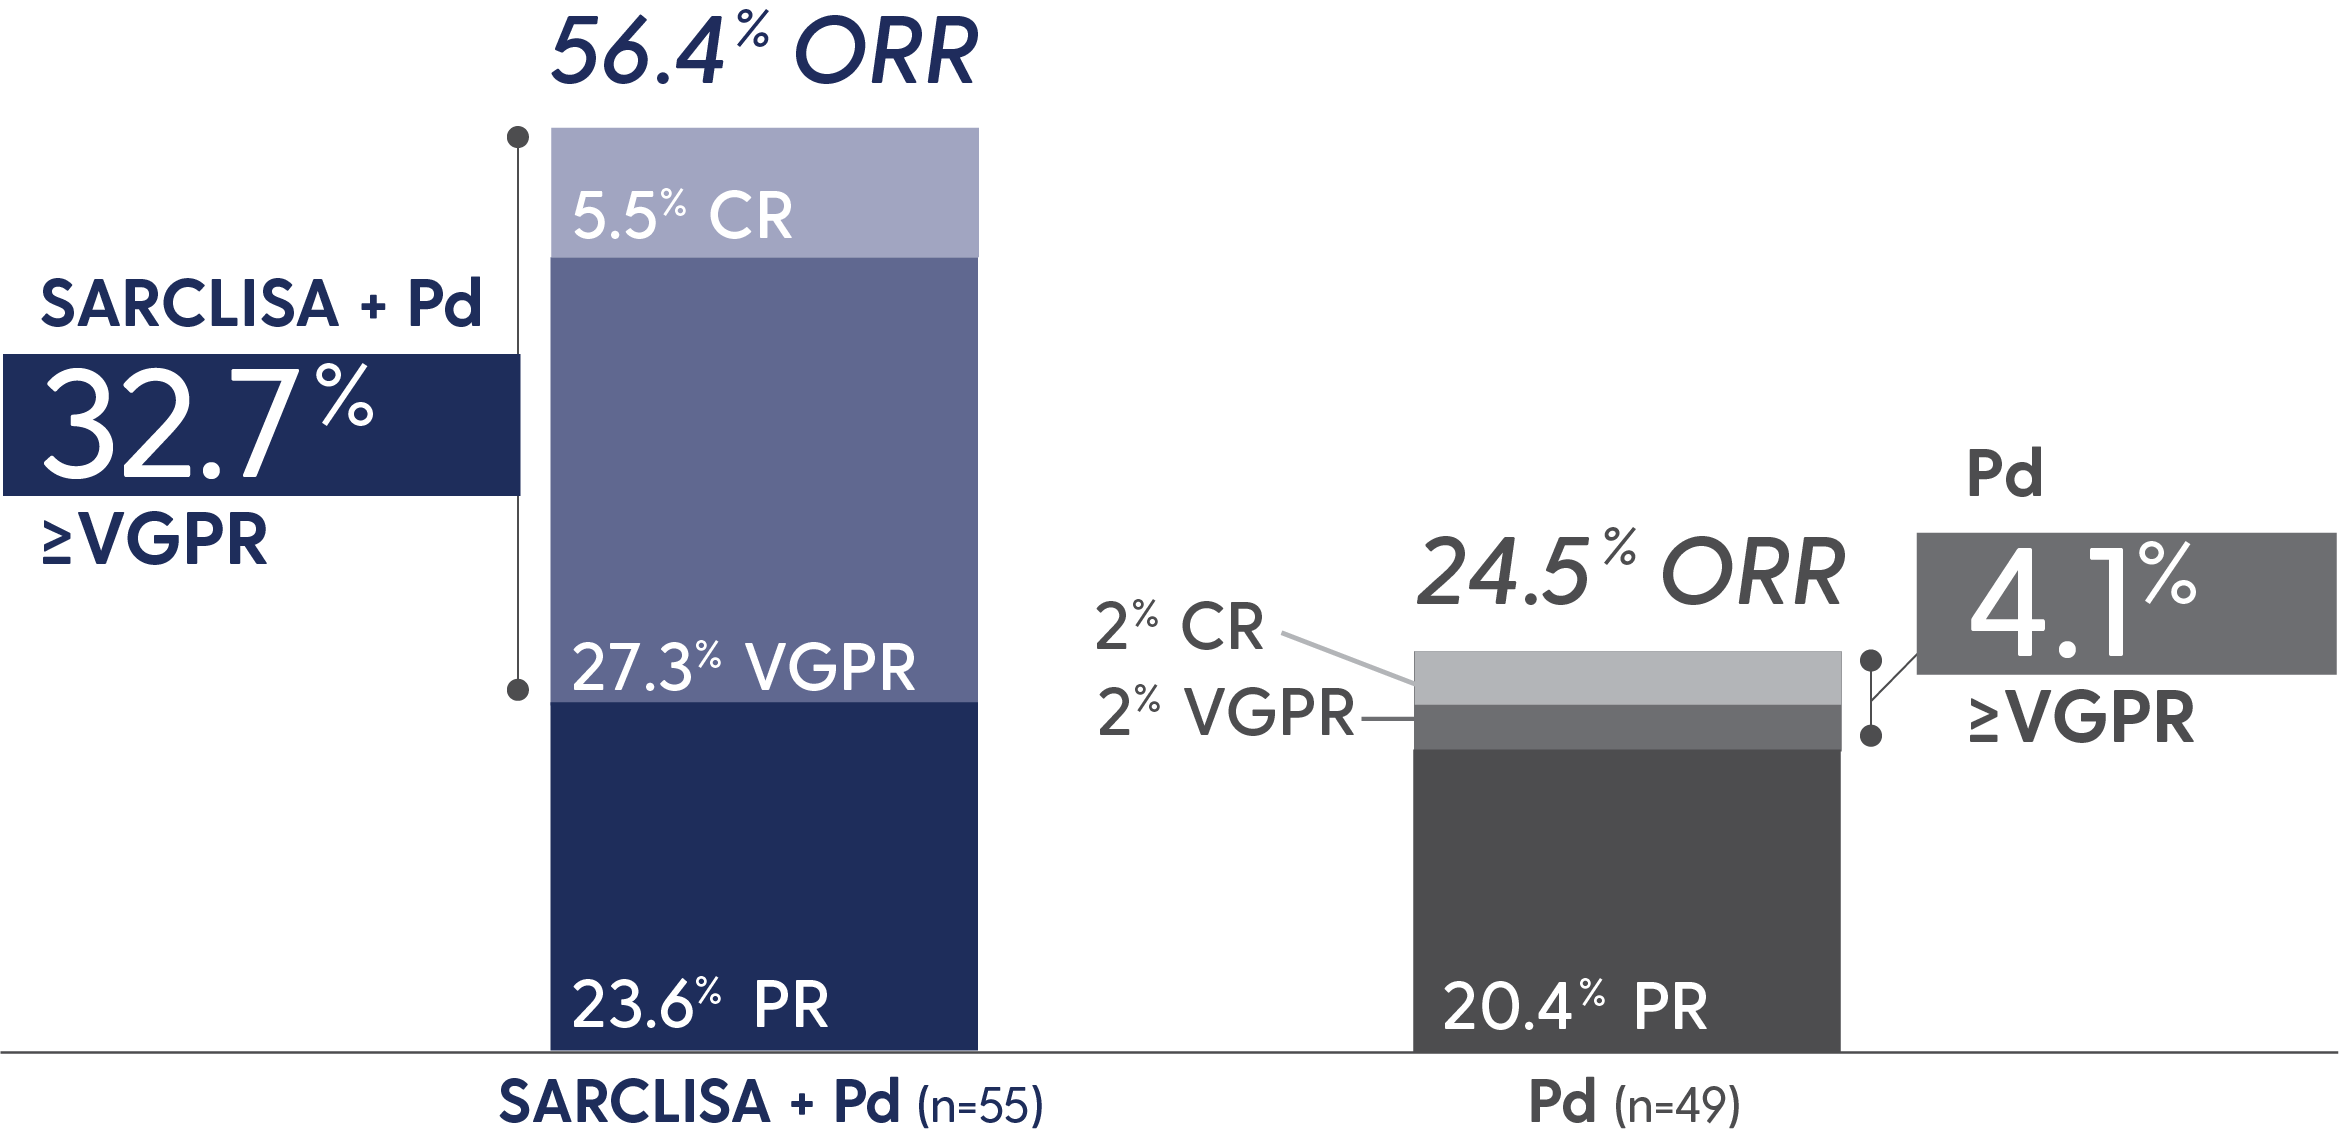 Response rates in patients with renal impairment; SARCLISA + Pd: 56.4% ORR, 5.5% CR, 33% ≥VGPR, 23.6% PR; Pd alone:
                                                    24.5% ORR, 2% CR, 4% ≥VGPR, 20.4% PR.